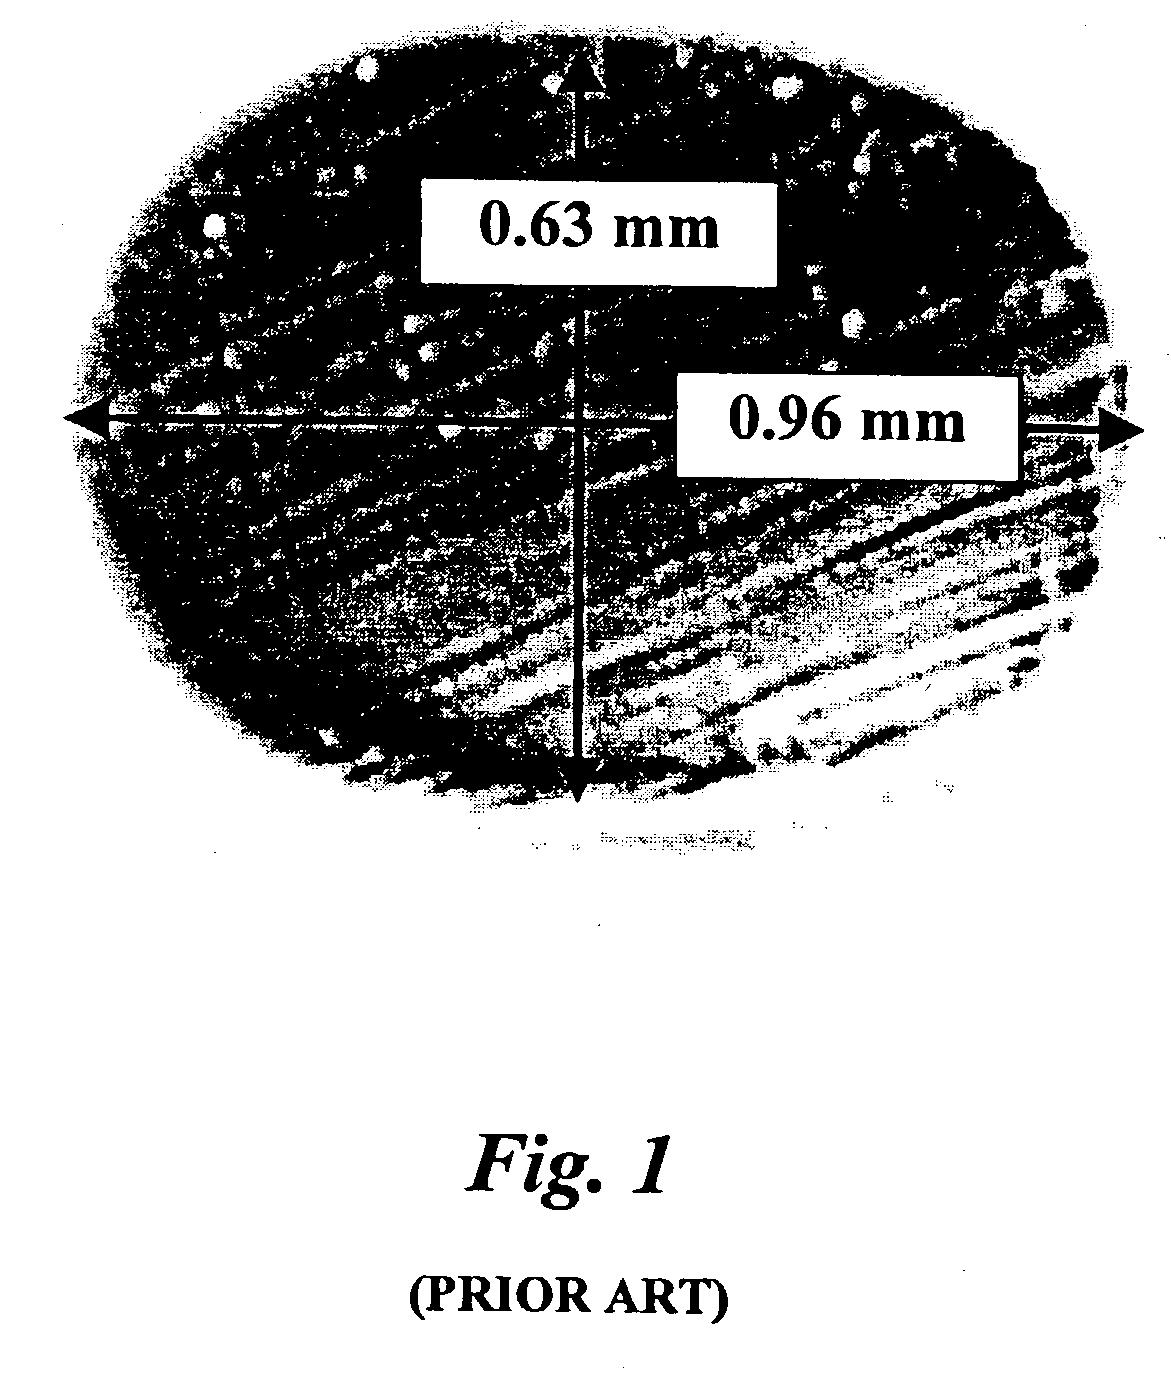 Cementitious compositions having highly dispersible polymeric reinforcing fibers